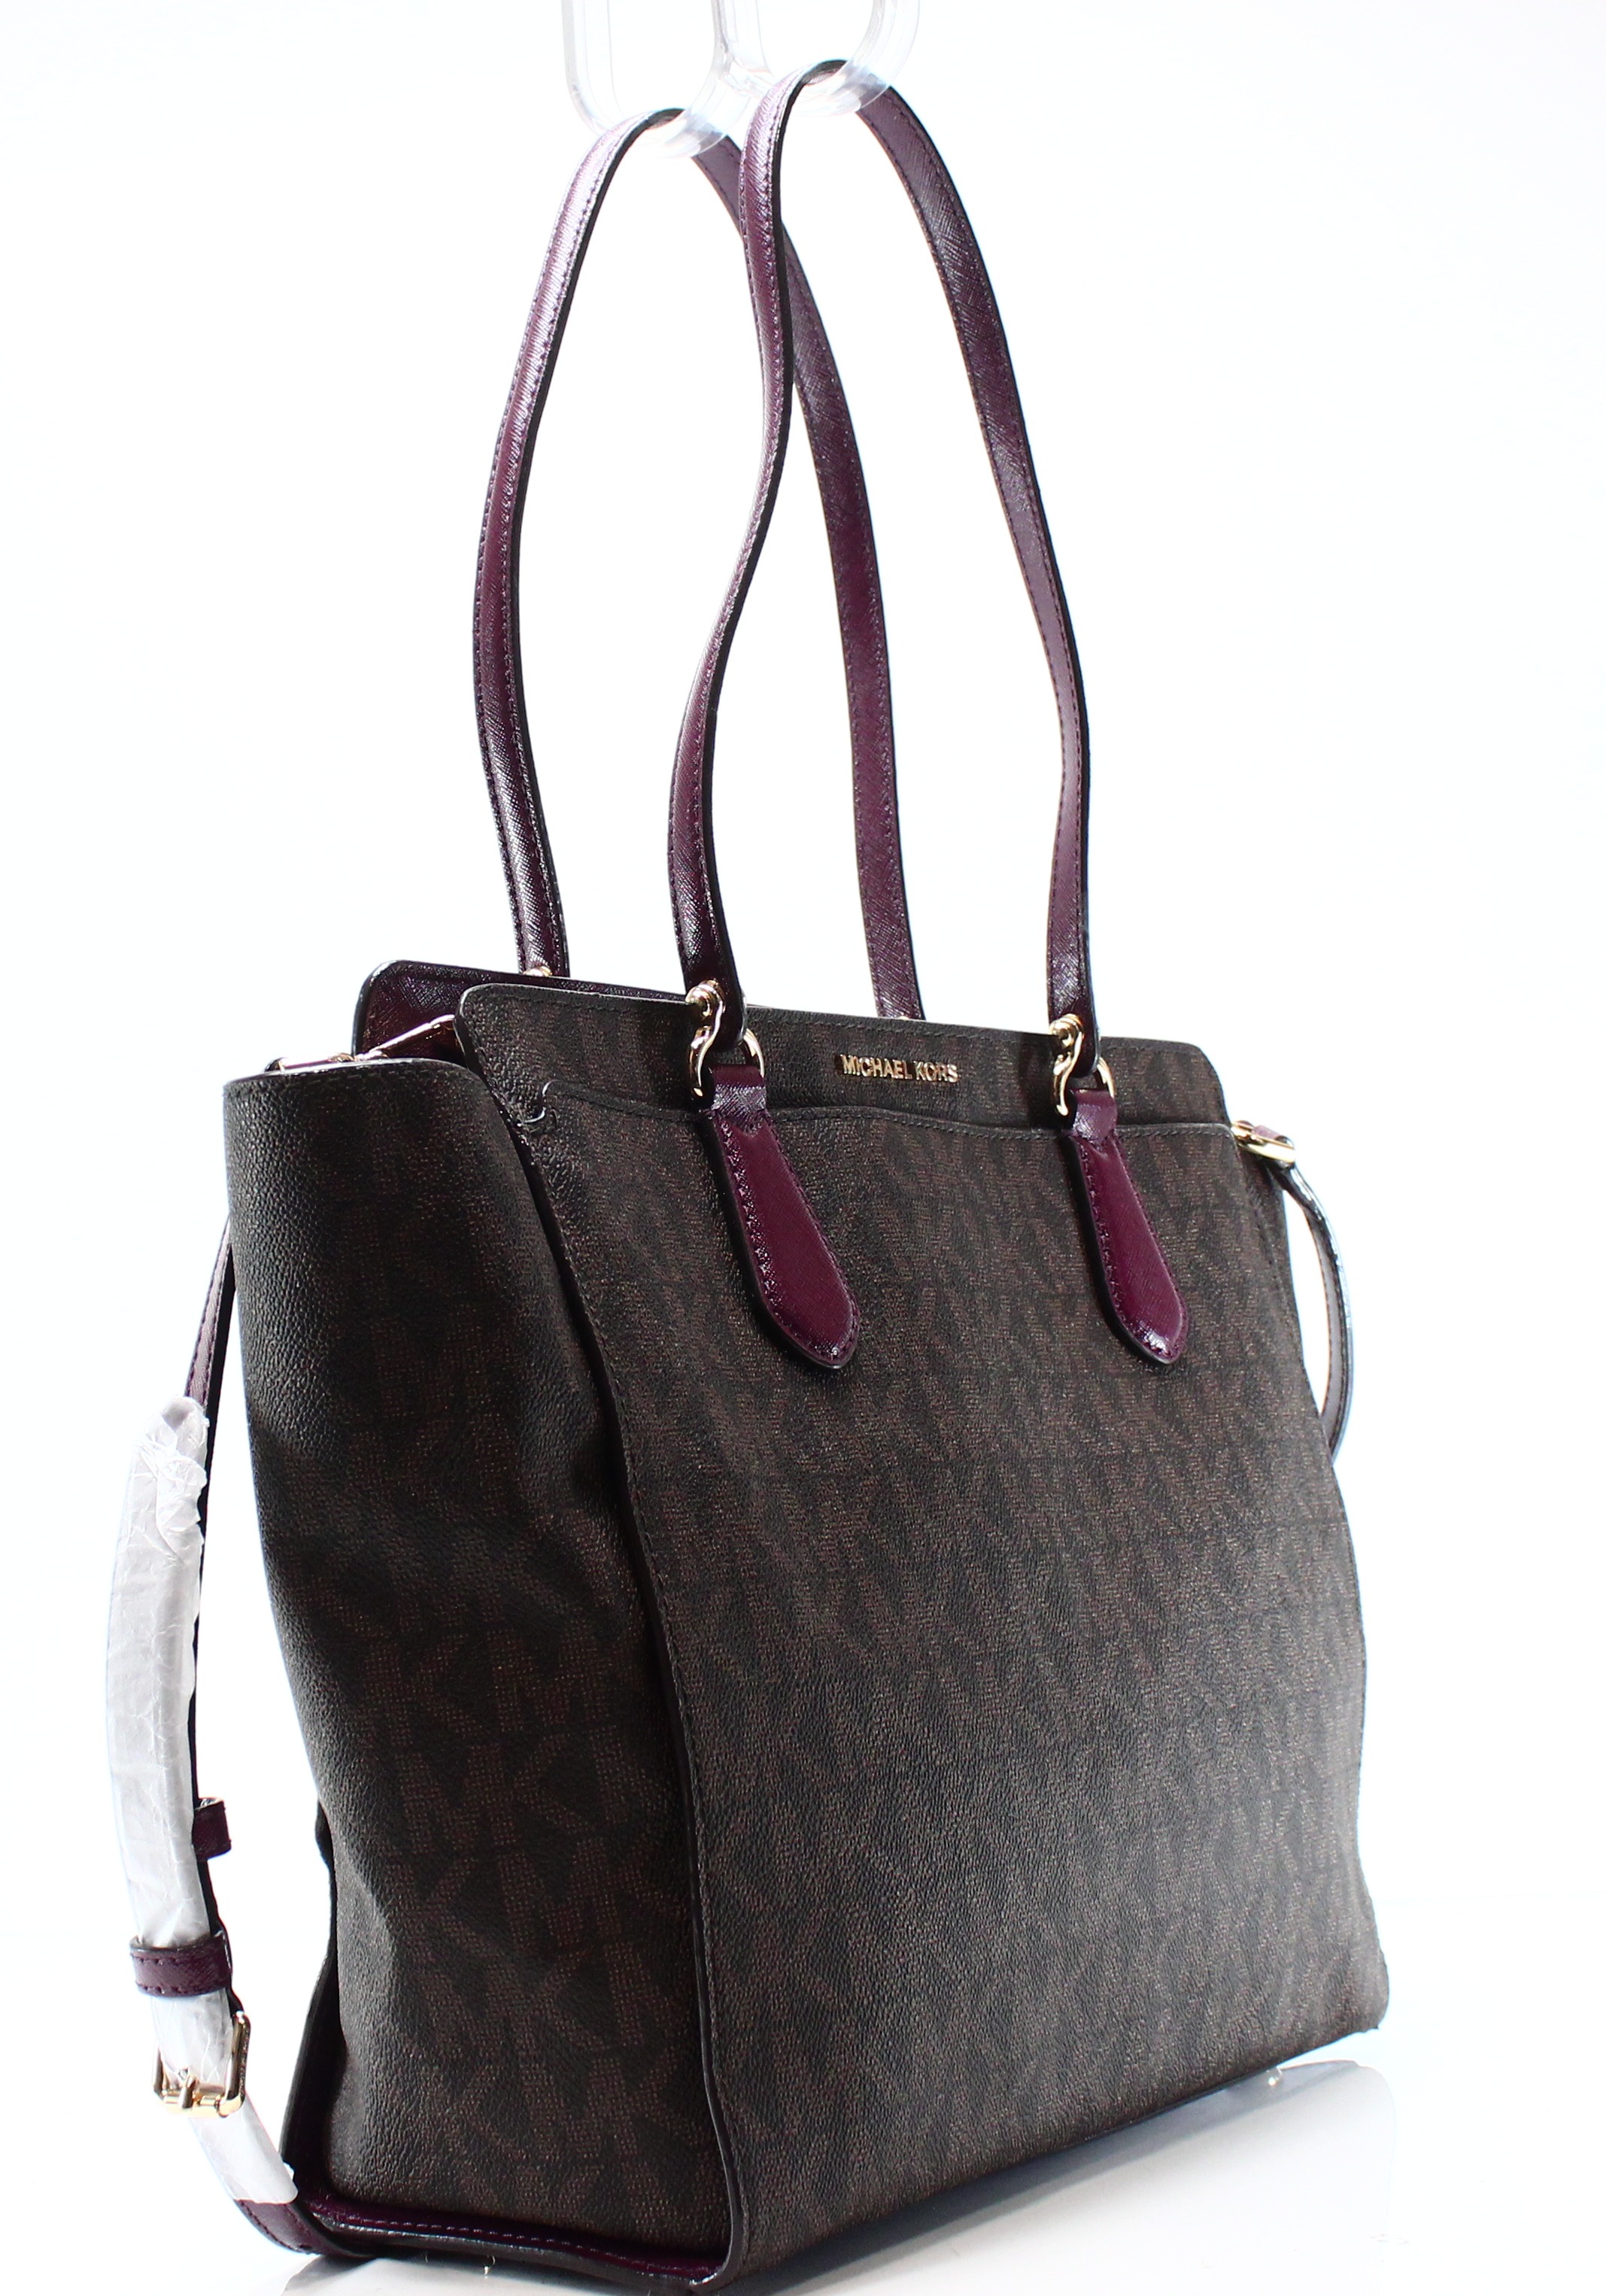 Dee Dee Large Convertible Logo Tote - Brown - 30F6GTWT4B-200 - image 4 of 6